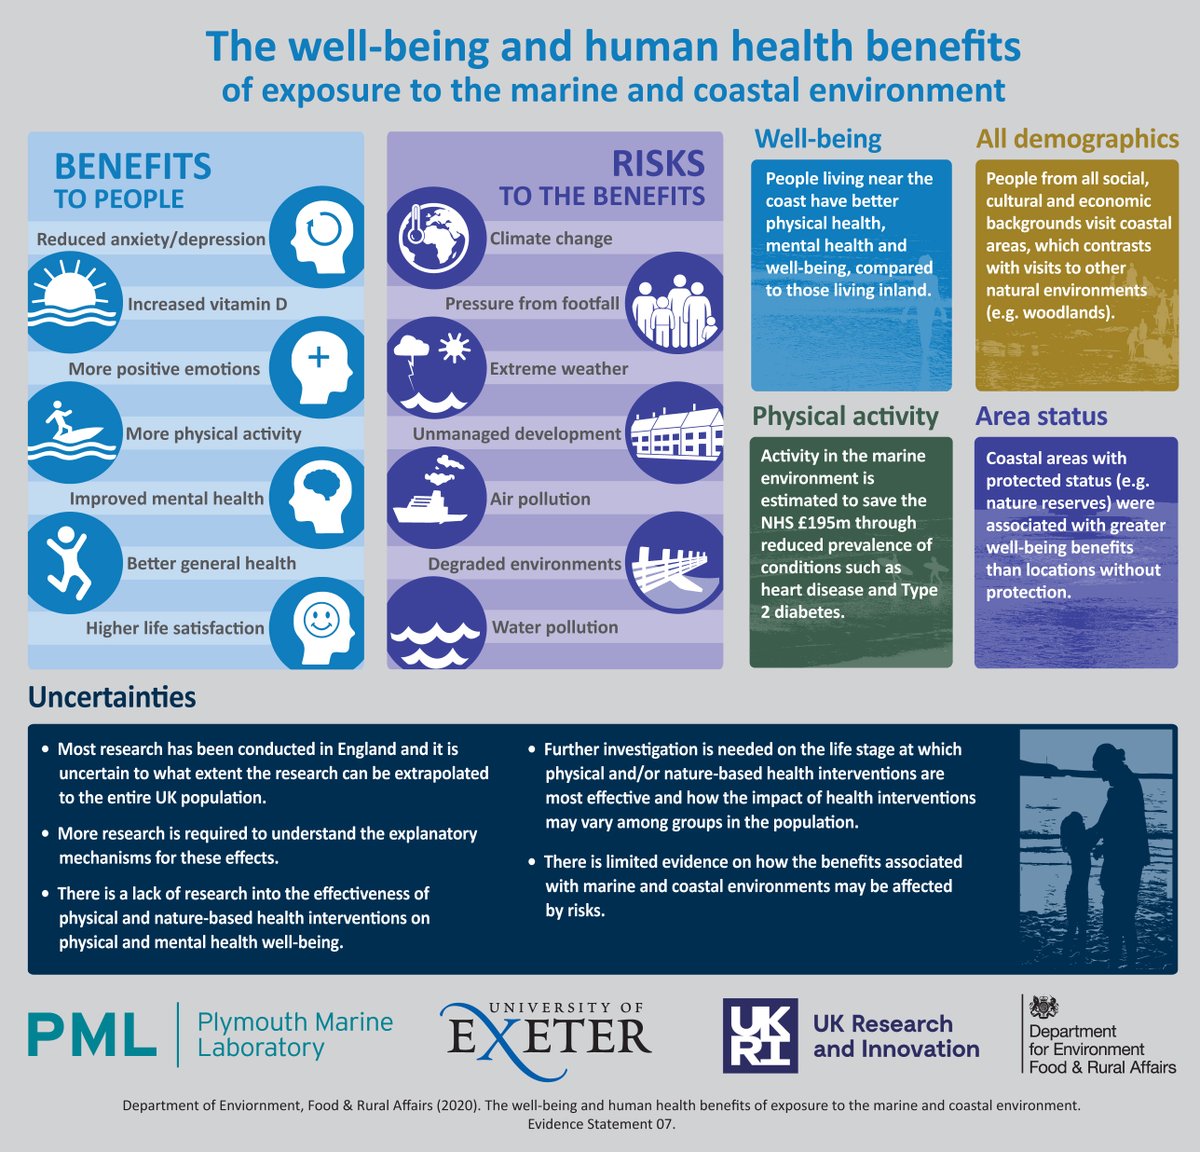 As #MentalHealthAwarenessWeek draws to a close today, we're re-sharing our study with the @UniofExeter, that found that spending time in marine and coastal environments has positive benefits on health and well-being. 🌊 Find out more: pml.ac.uk/News/Defra-rep…